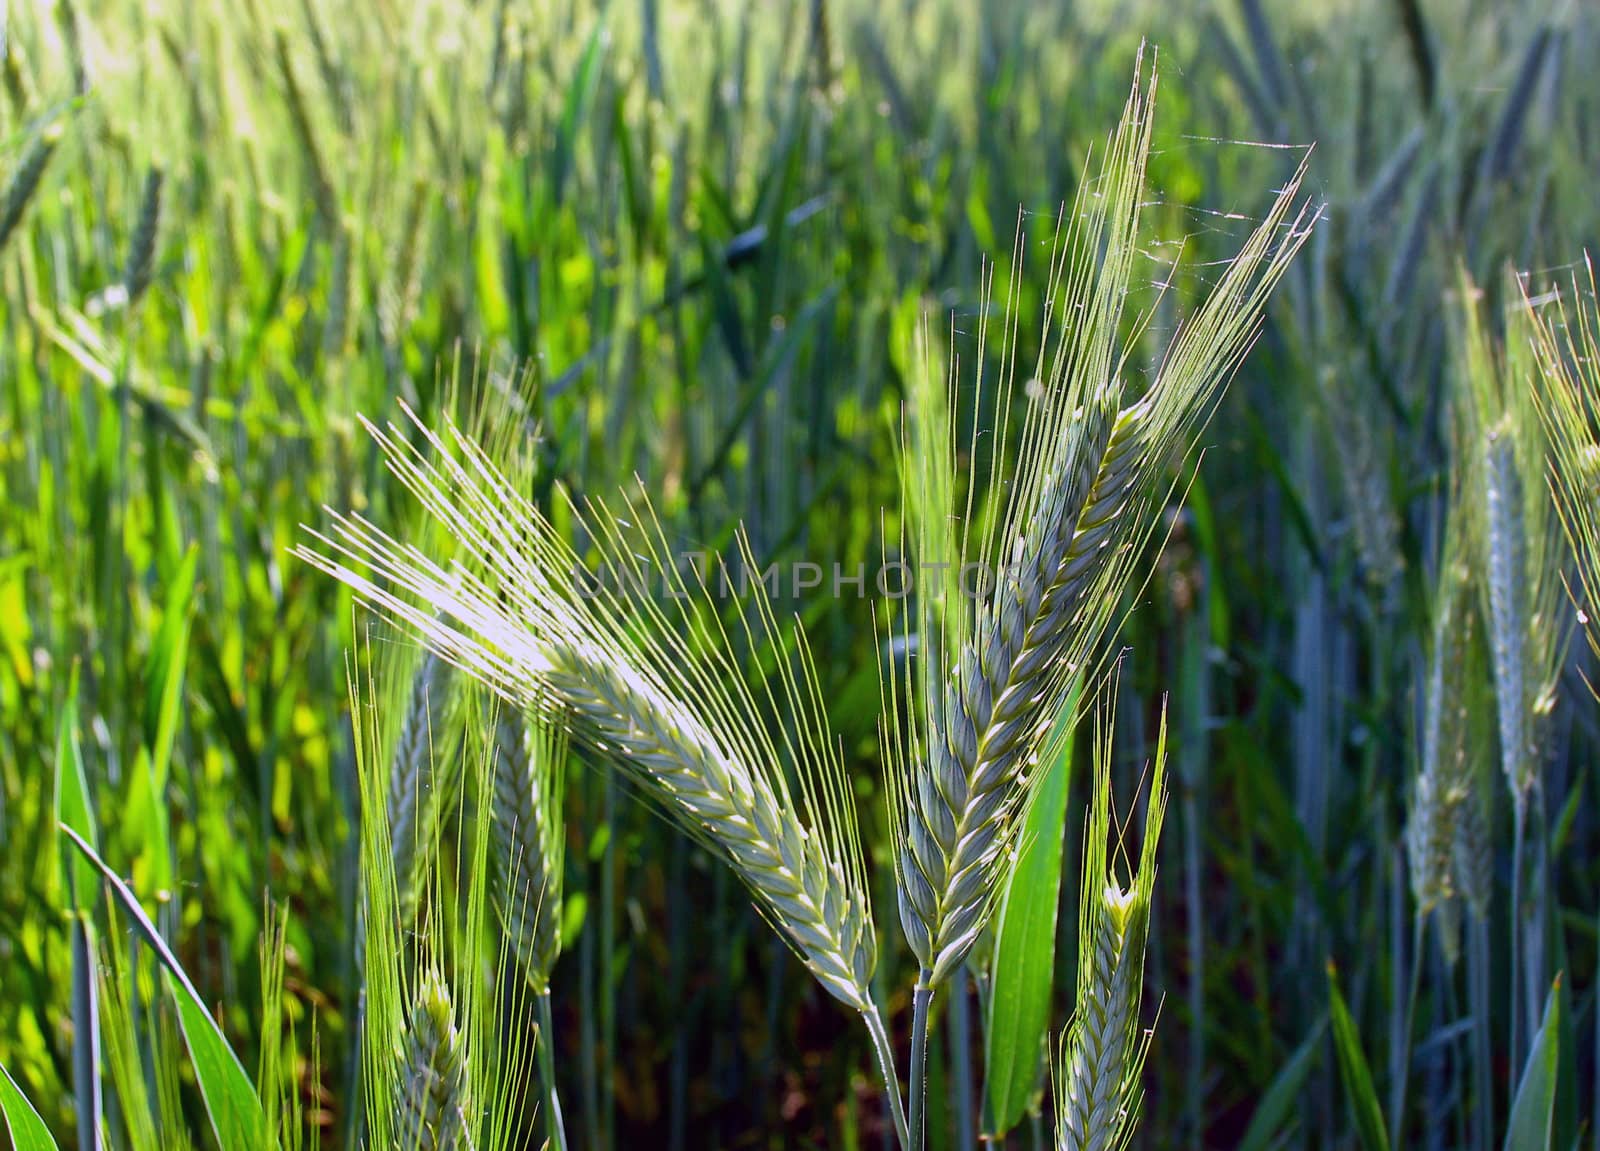 Late summer in a barley field with focus on two of the ears